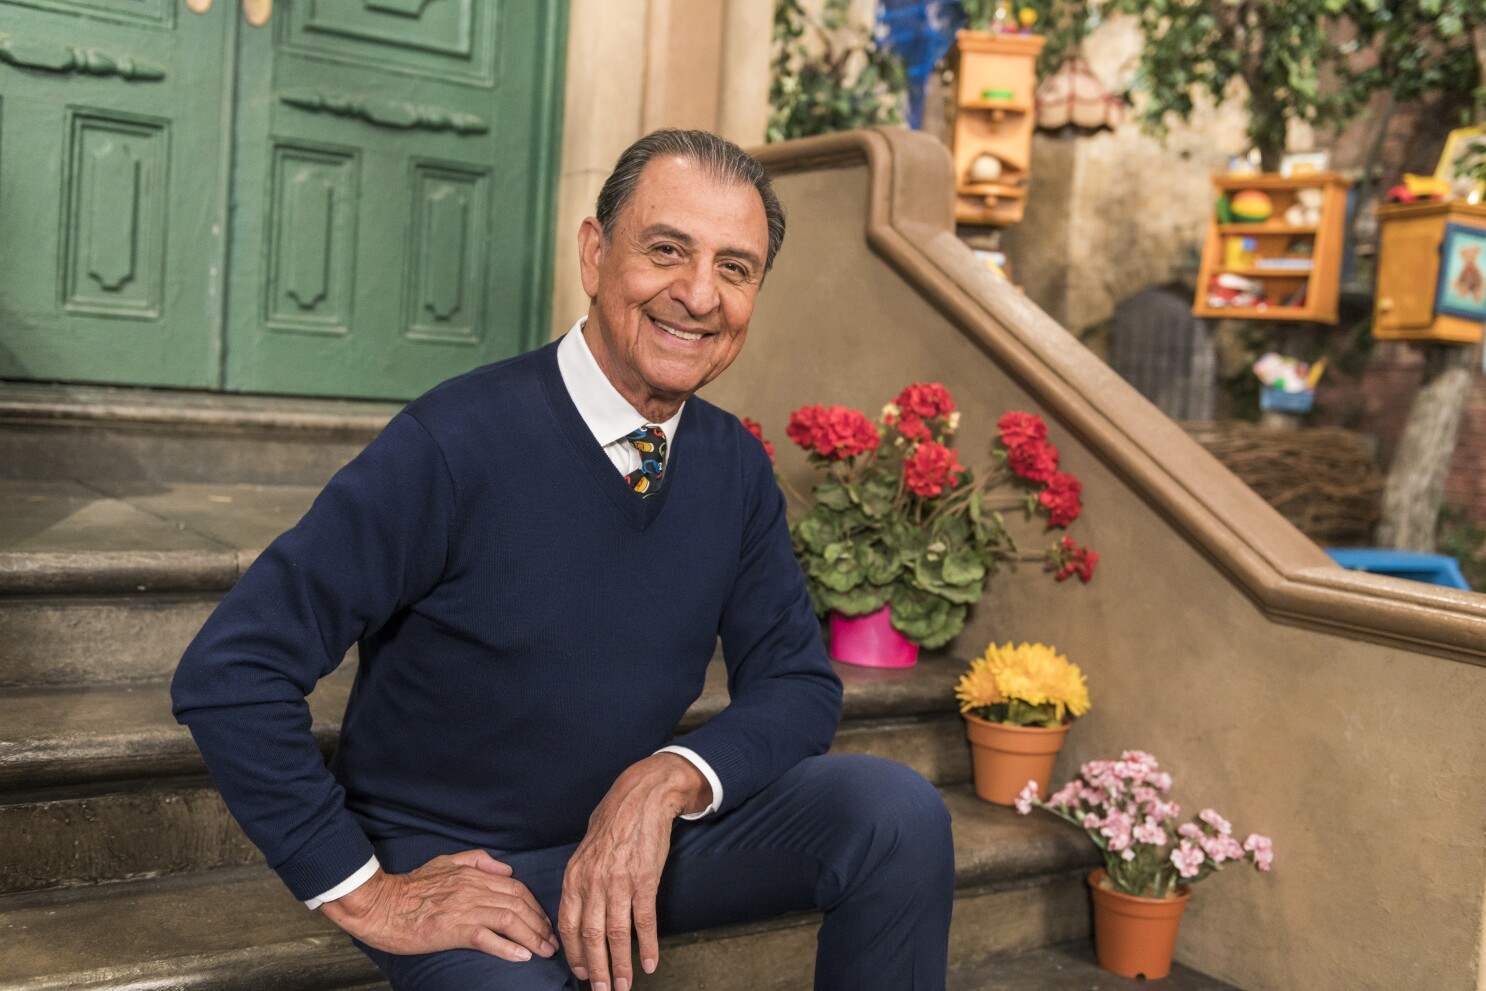 Emilio Delgado, who played Lewis on Sesame Street for 45 years, has died